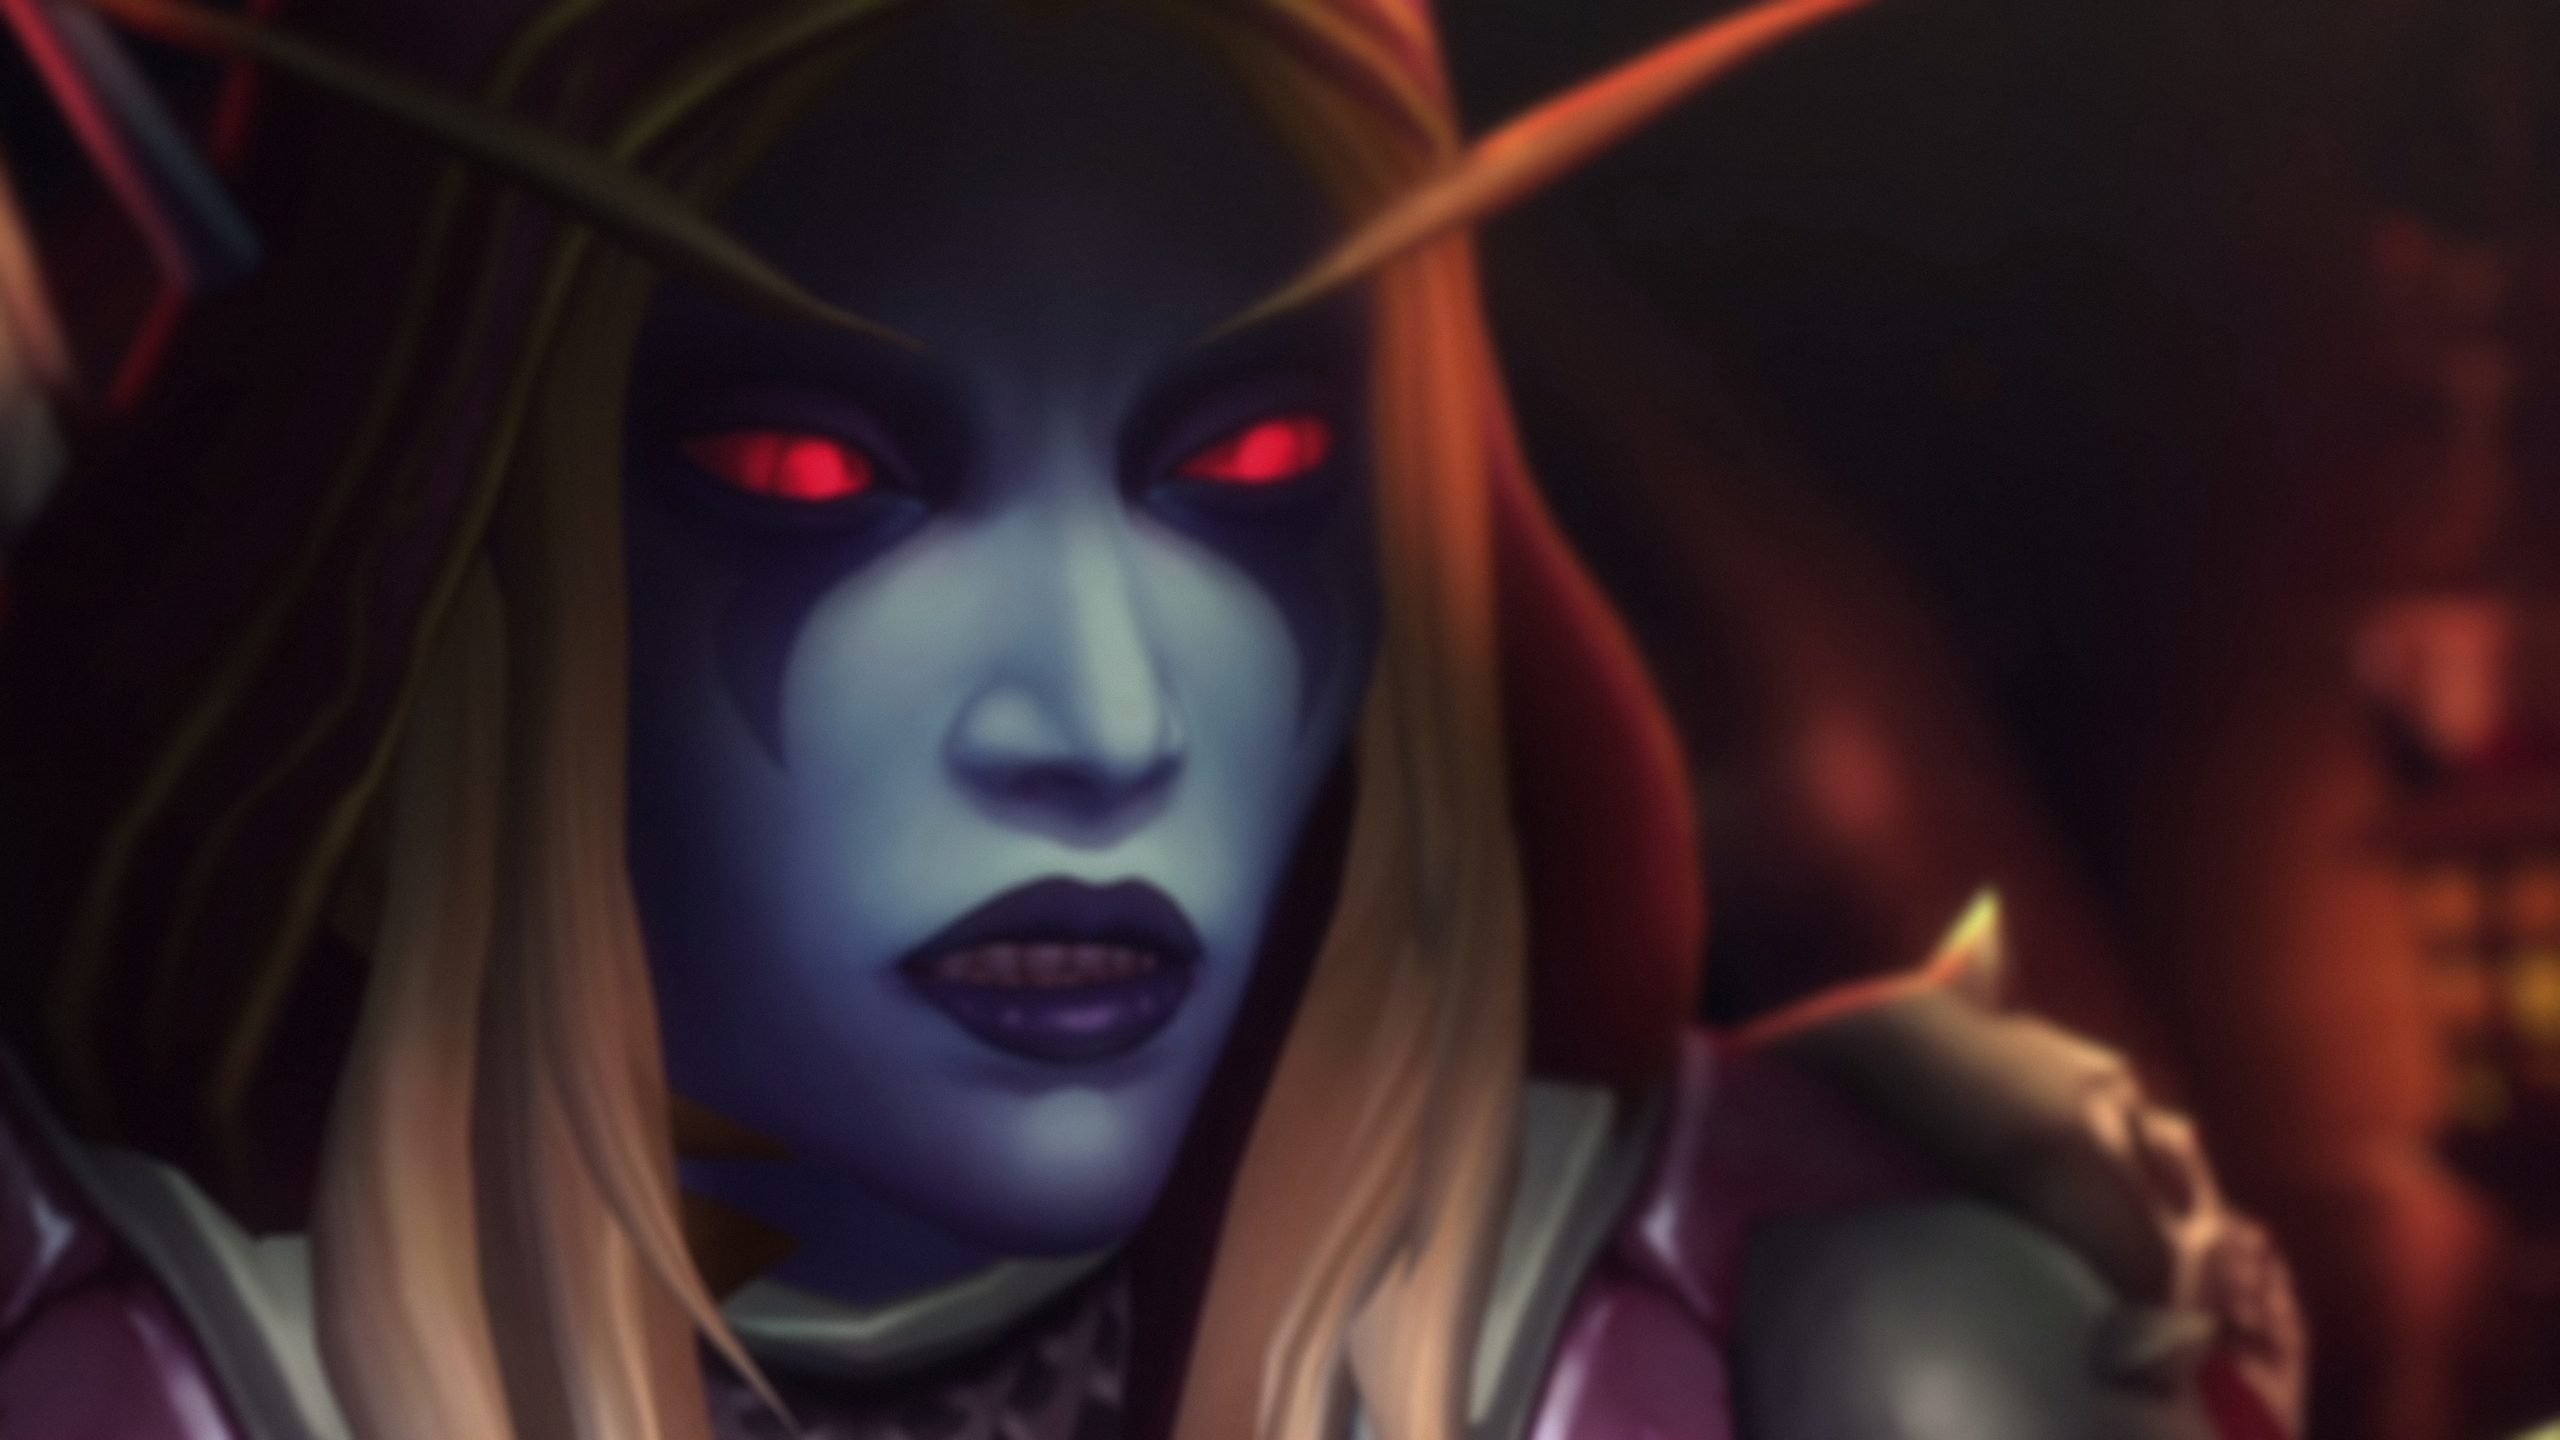 General 2560x1440 World of Warcraft Sylvanas Windrunner Blizzard Entertainment video game characters PC gaming face fantasy girl glowing eyes red eyes digital art closeup blurred